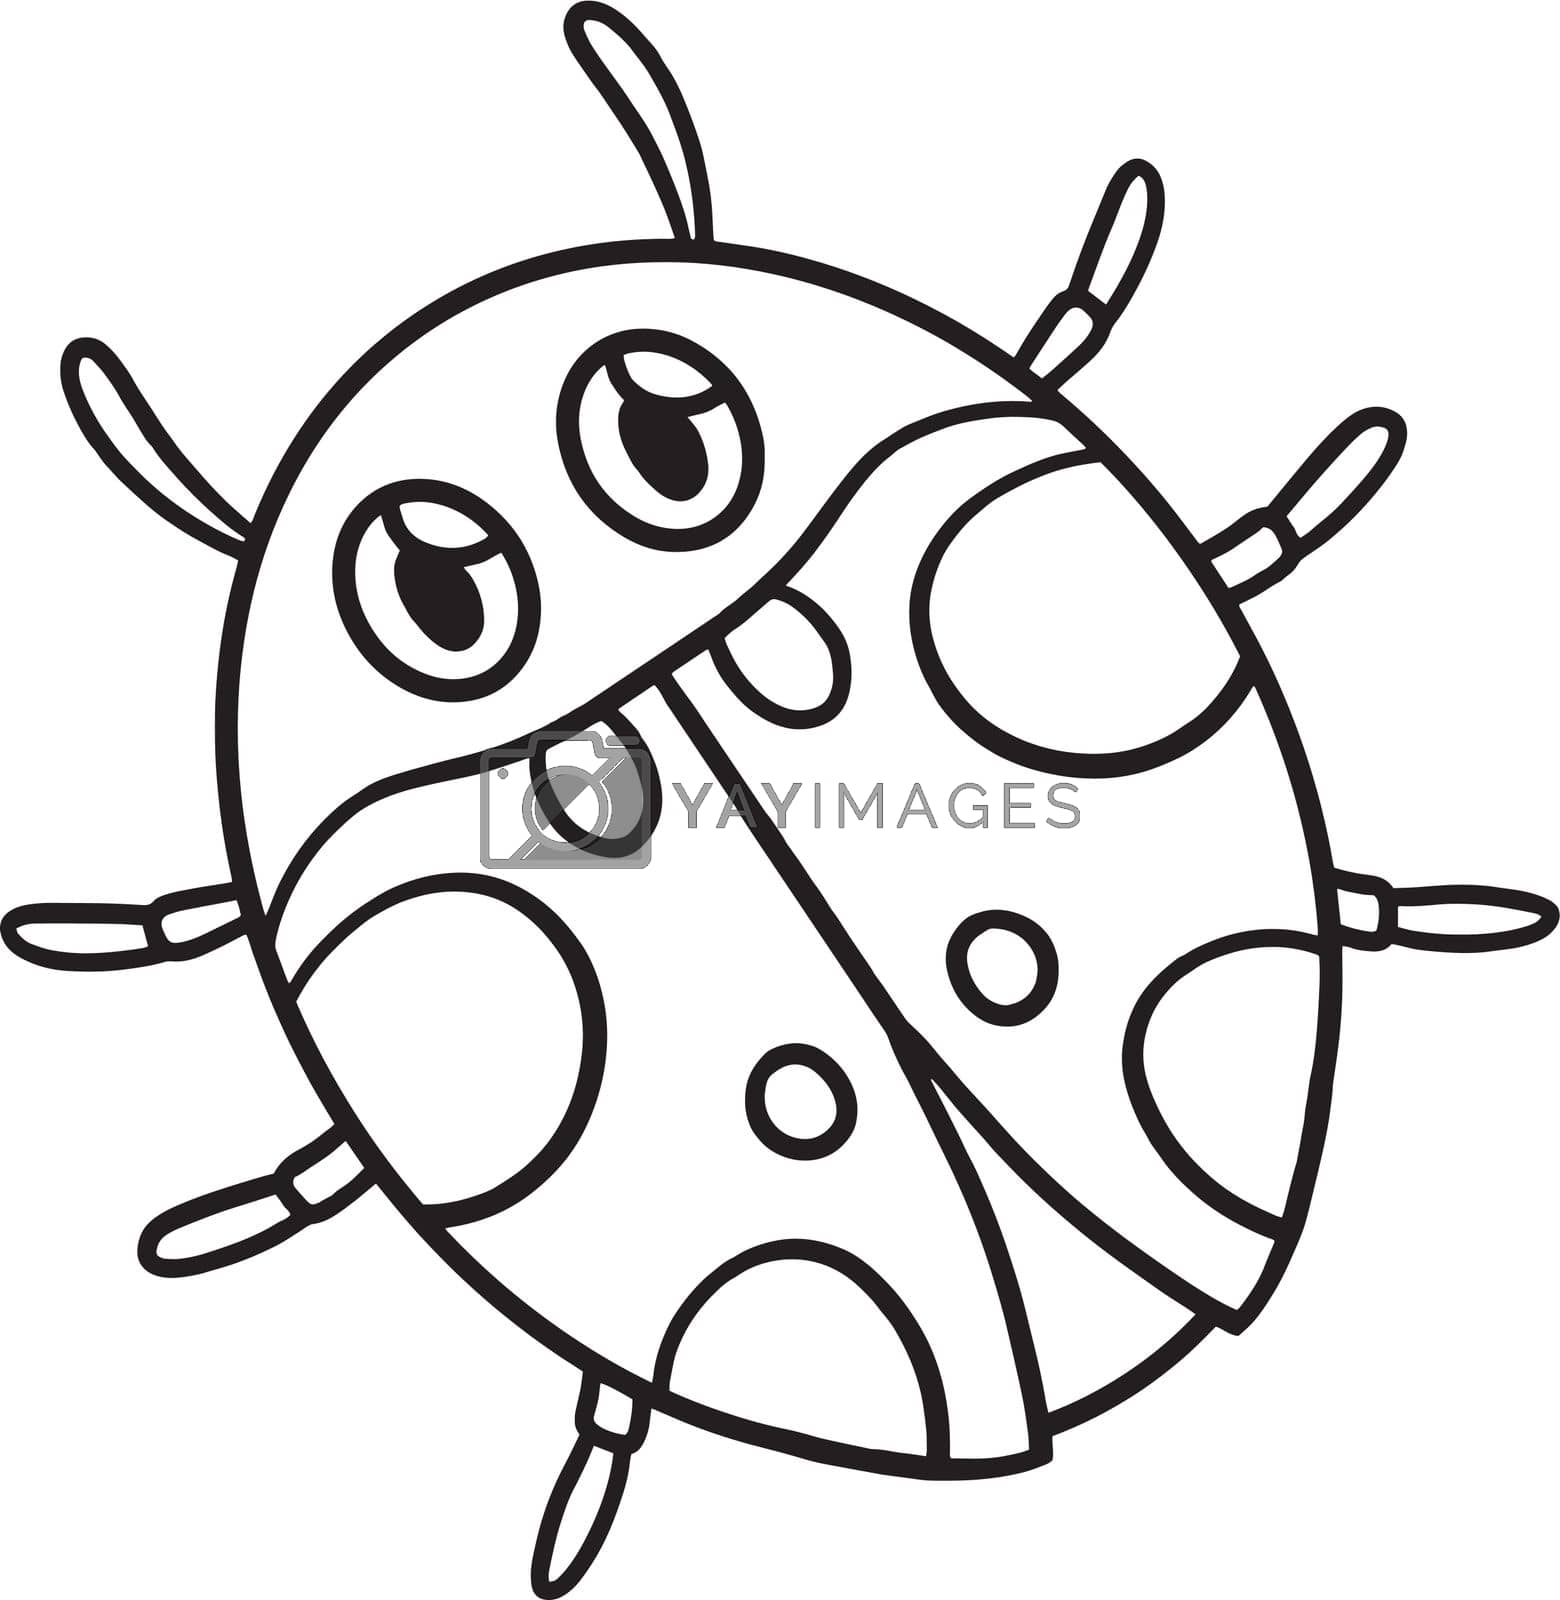 Royalty free image of Spring Ladybug Isolated Coloring Page for Kids by abbydesign